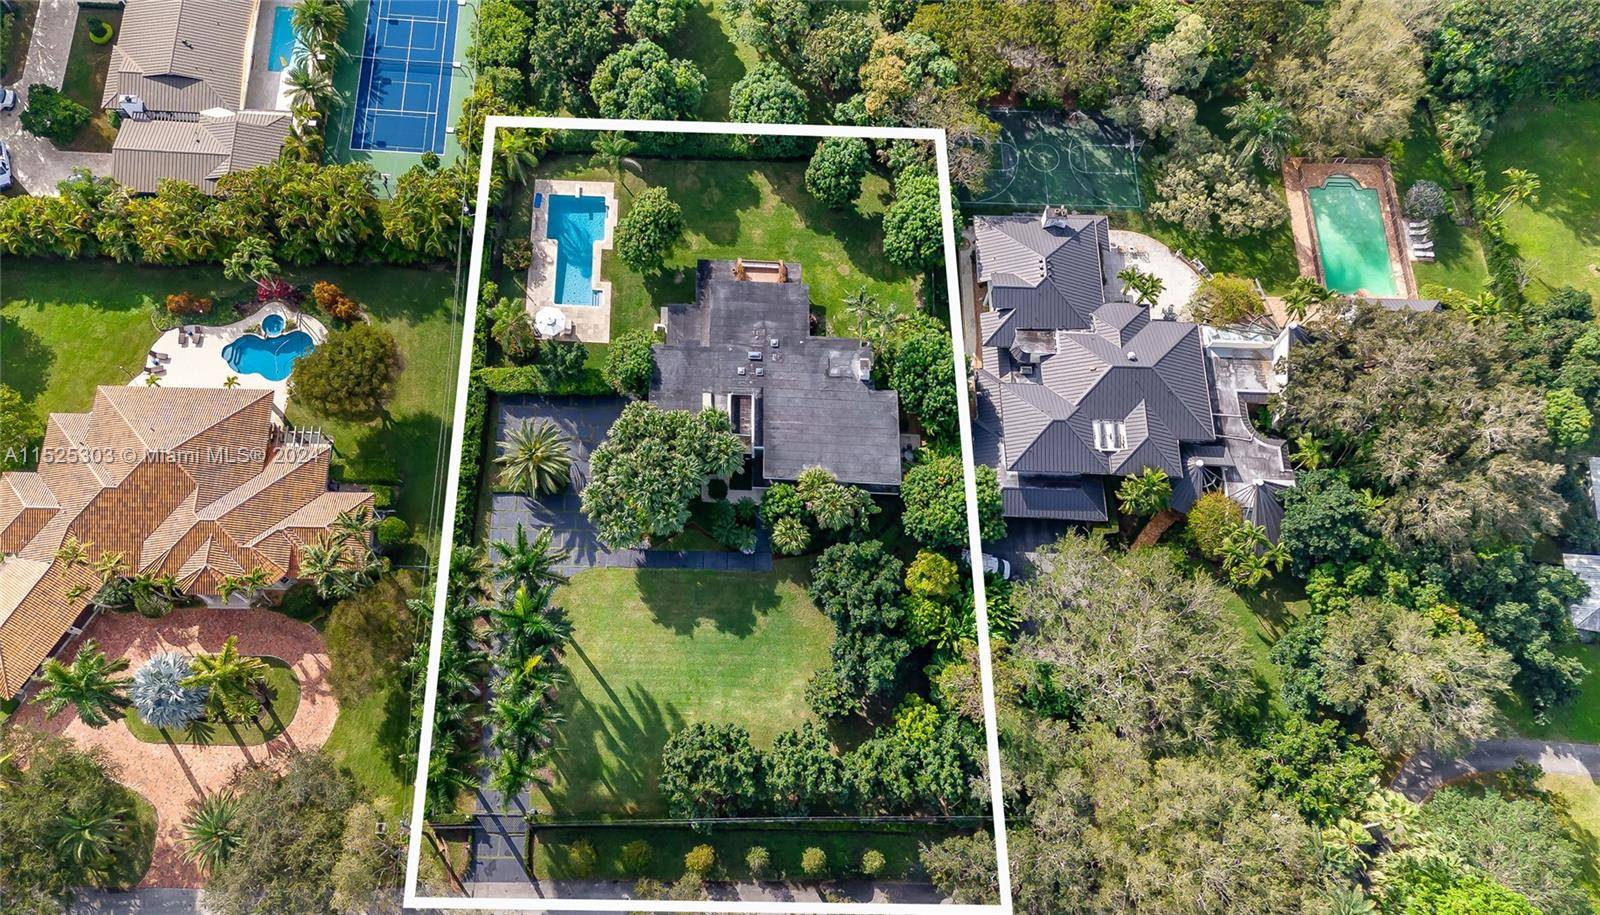 Exceptional one of a kind modern style masterpiece masterfully designed by reknown Arquitect, perfectly settled on very large lot surrounded with mature trees and manicured lush landscaping in the exclusive ...